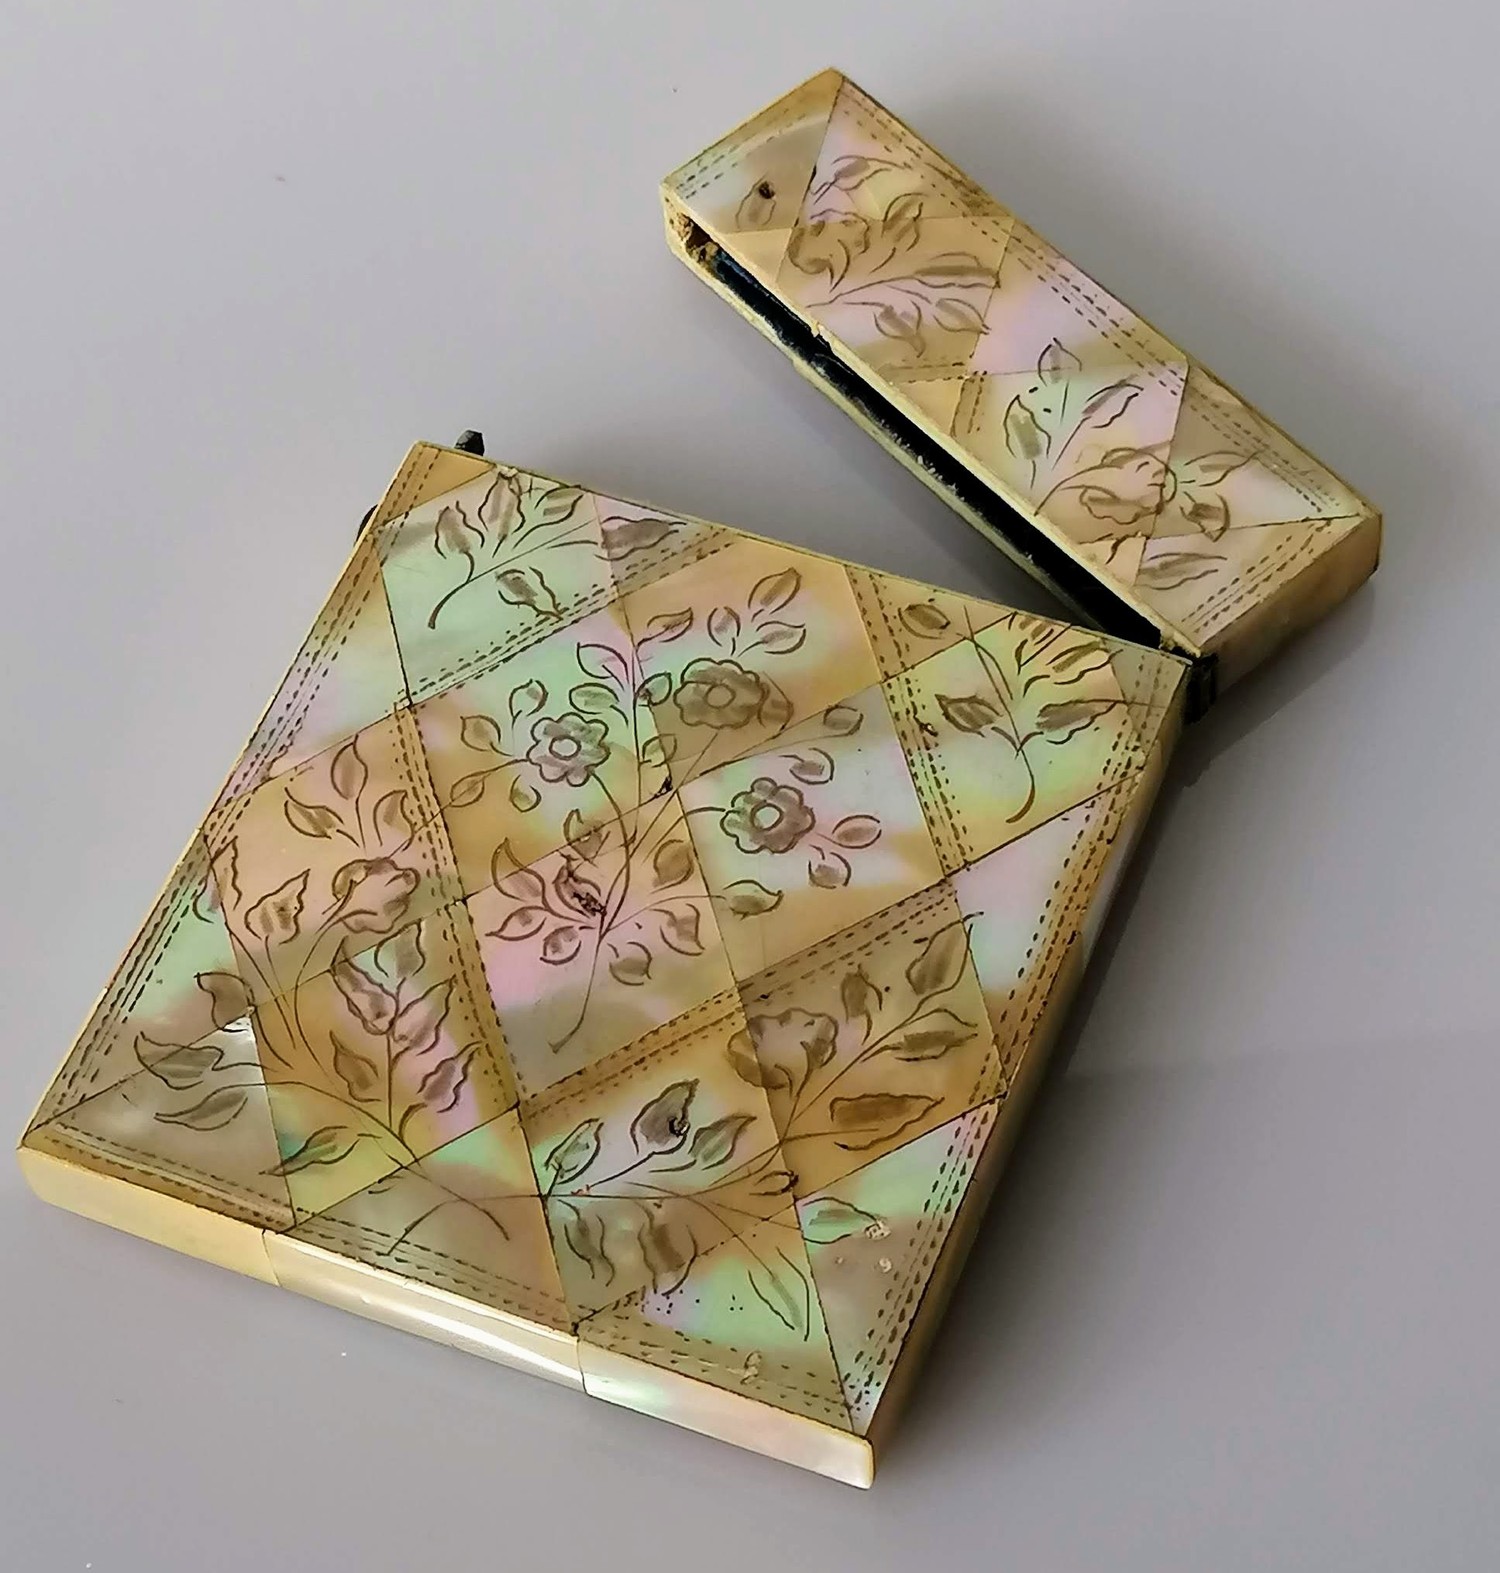 A mother-of-pearl oblong card case with hinged lid and floral decoration, 10 x 8 cm, in good - Bild 3 aus 3